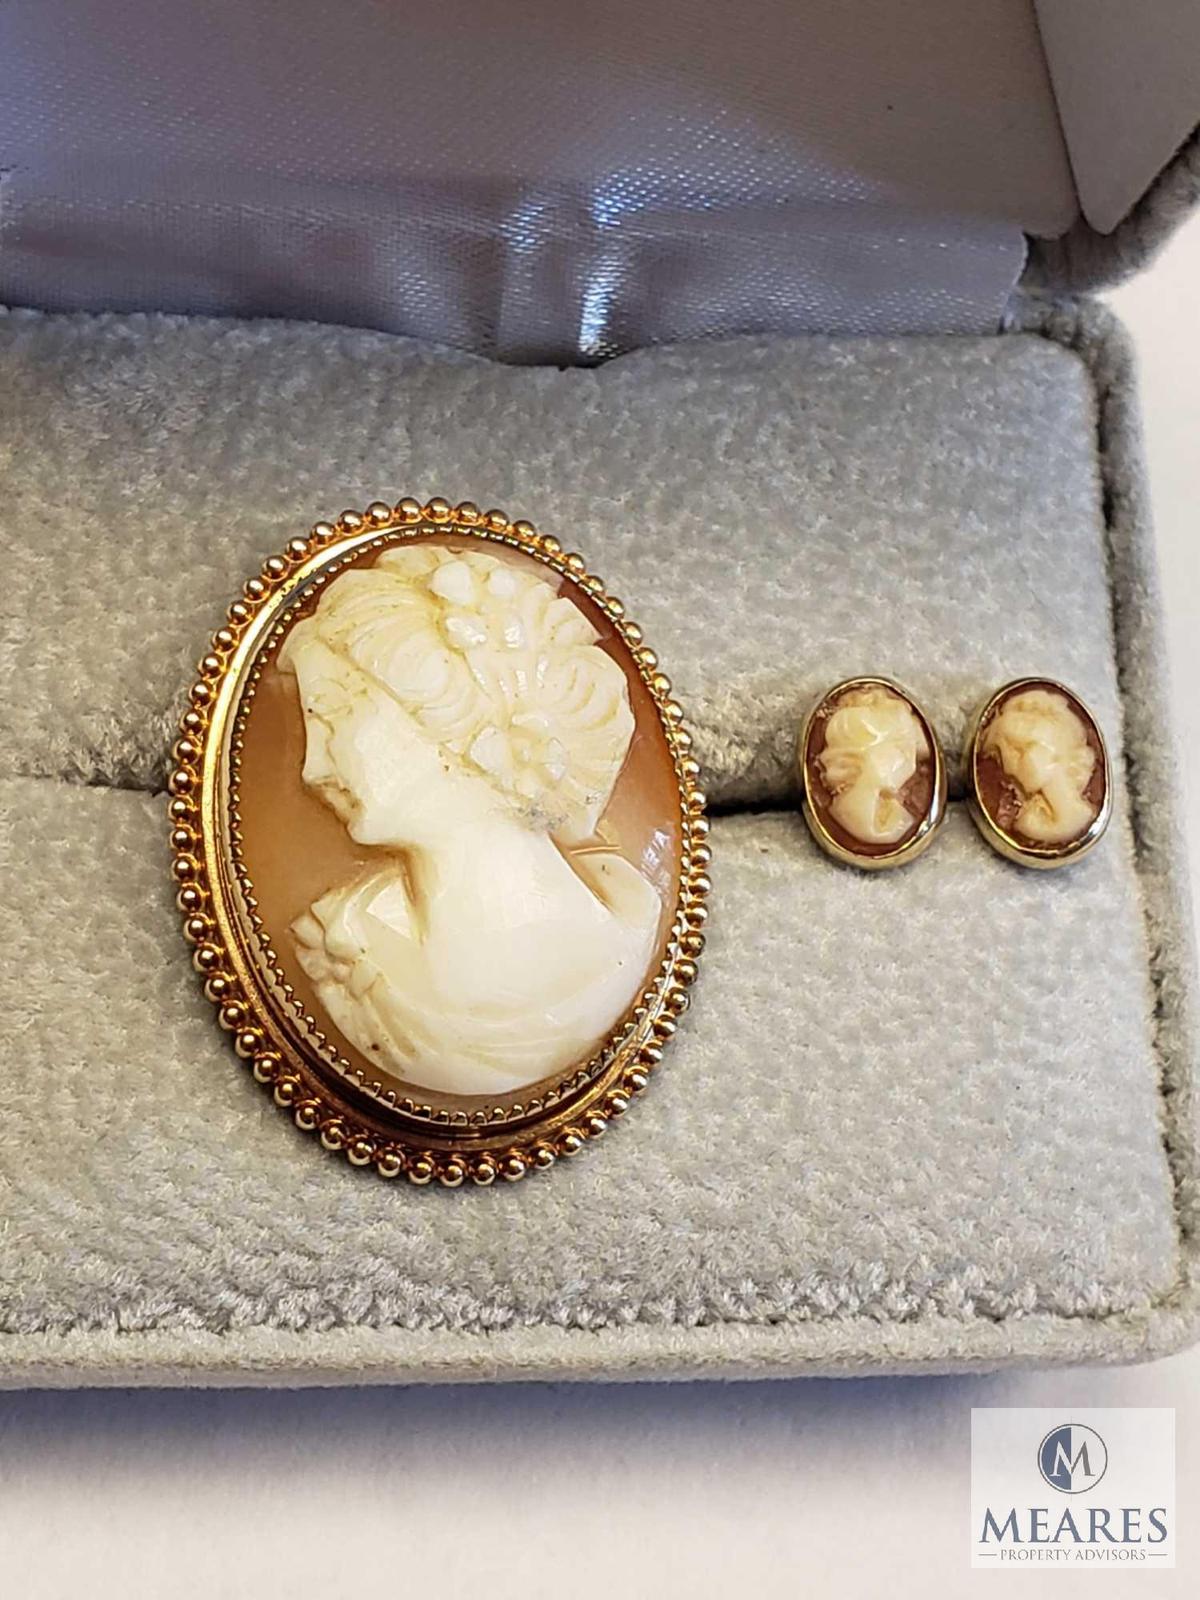 Cameo Brooch/Pendant with Matching Push Back Post Earrings